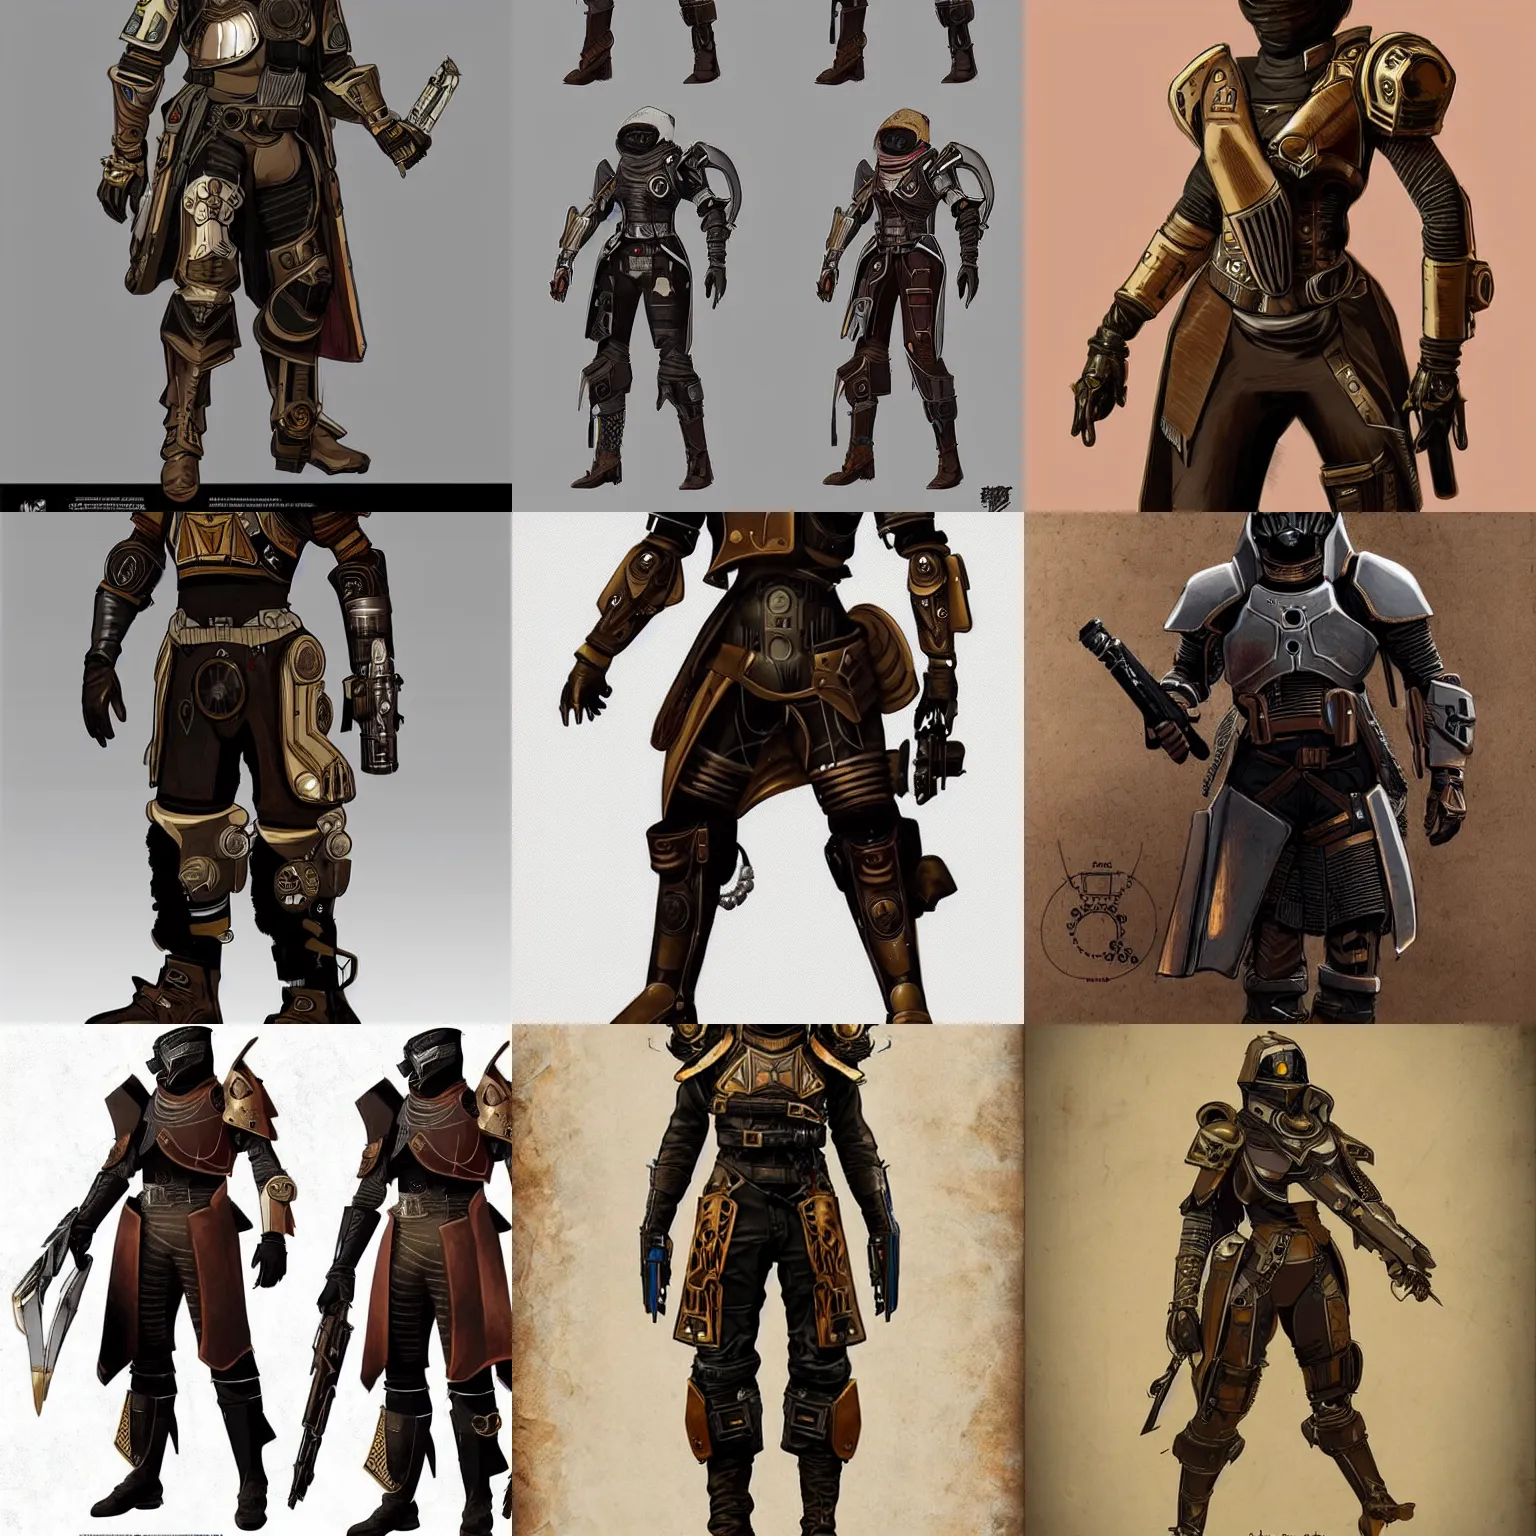 Prompt: Intricate and detailed Destiny 2 armor in the style of steampunk/dieselpunk, concept art